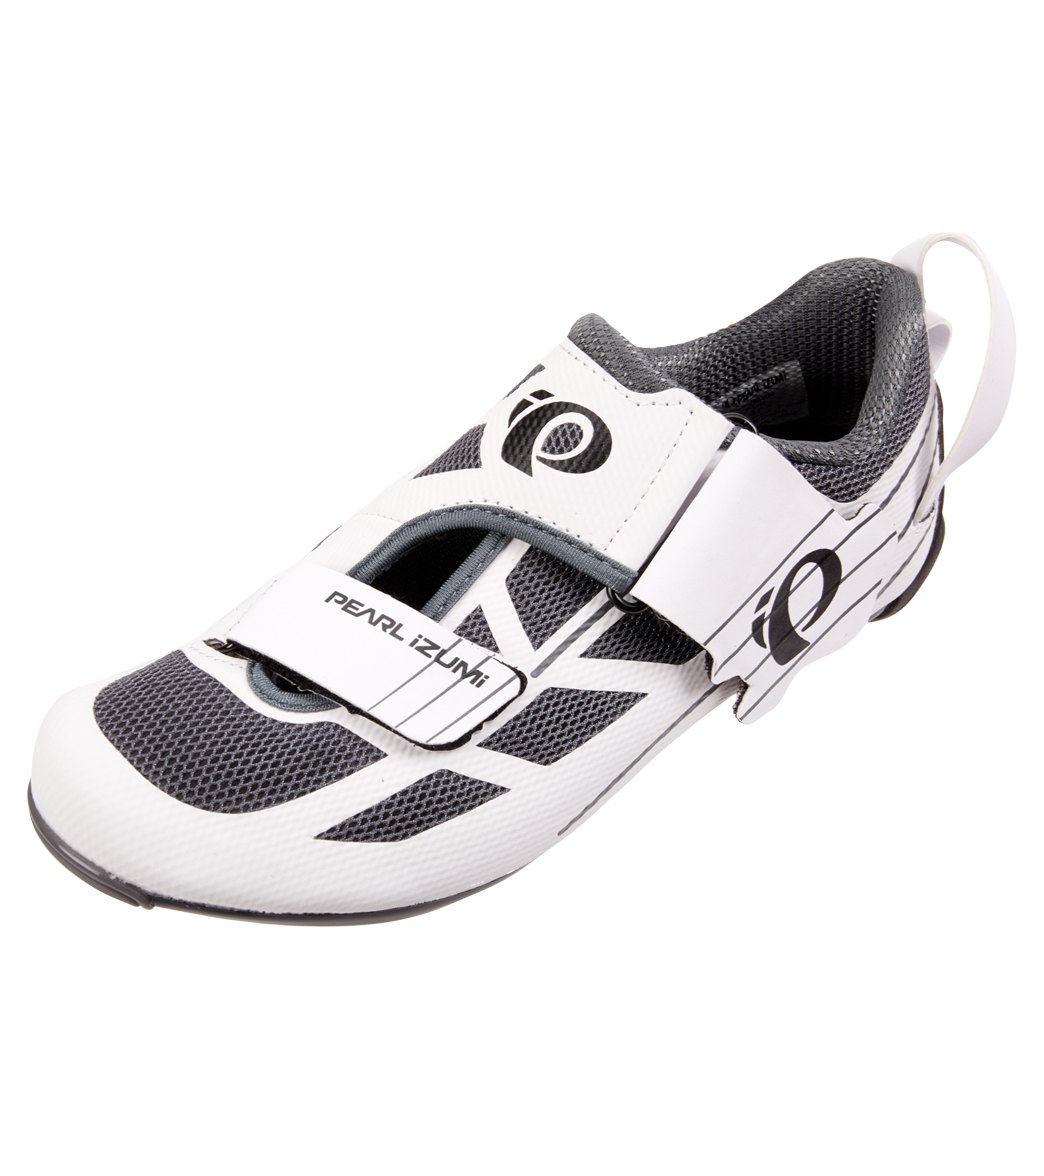 Tri Fly Select v6 Cycling Shoes 